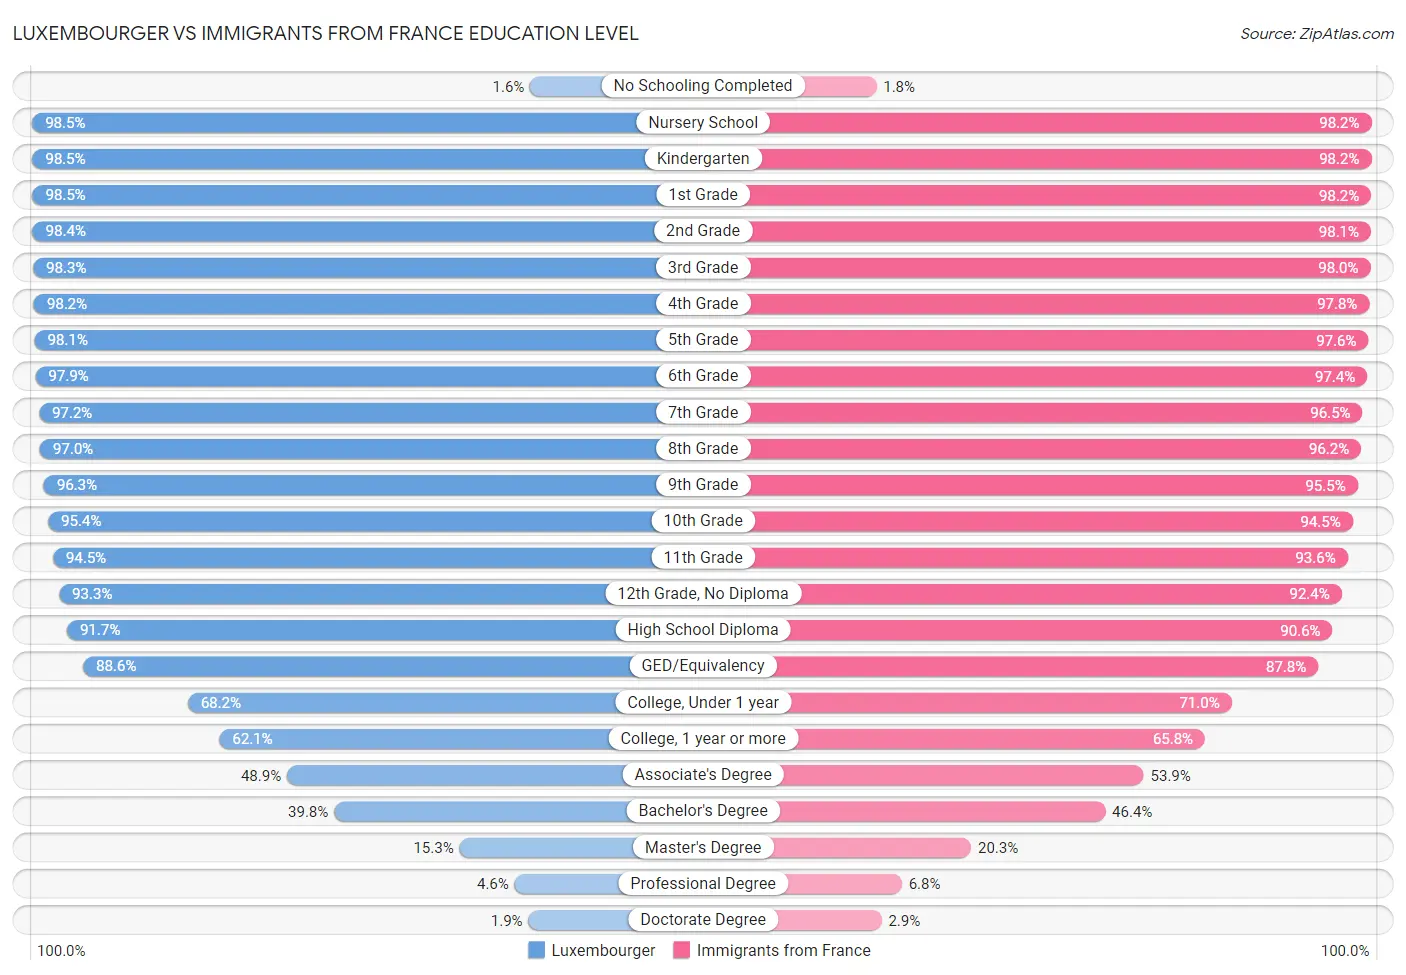 Luxembourger vs Immigrants from France Education Level